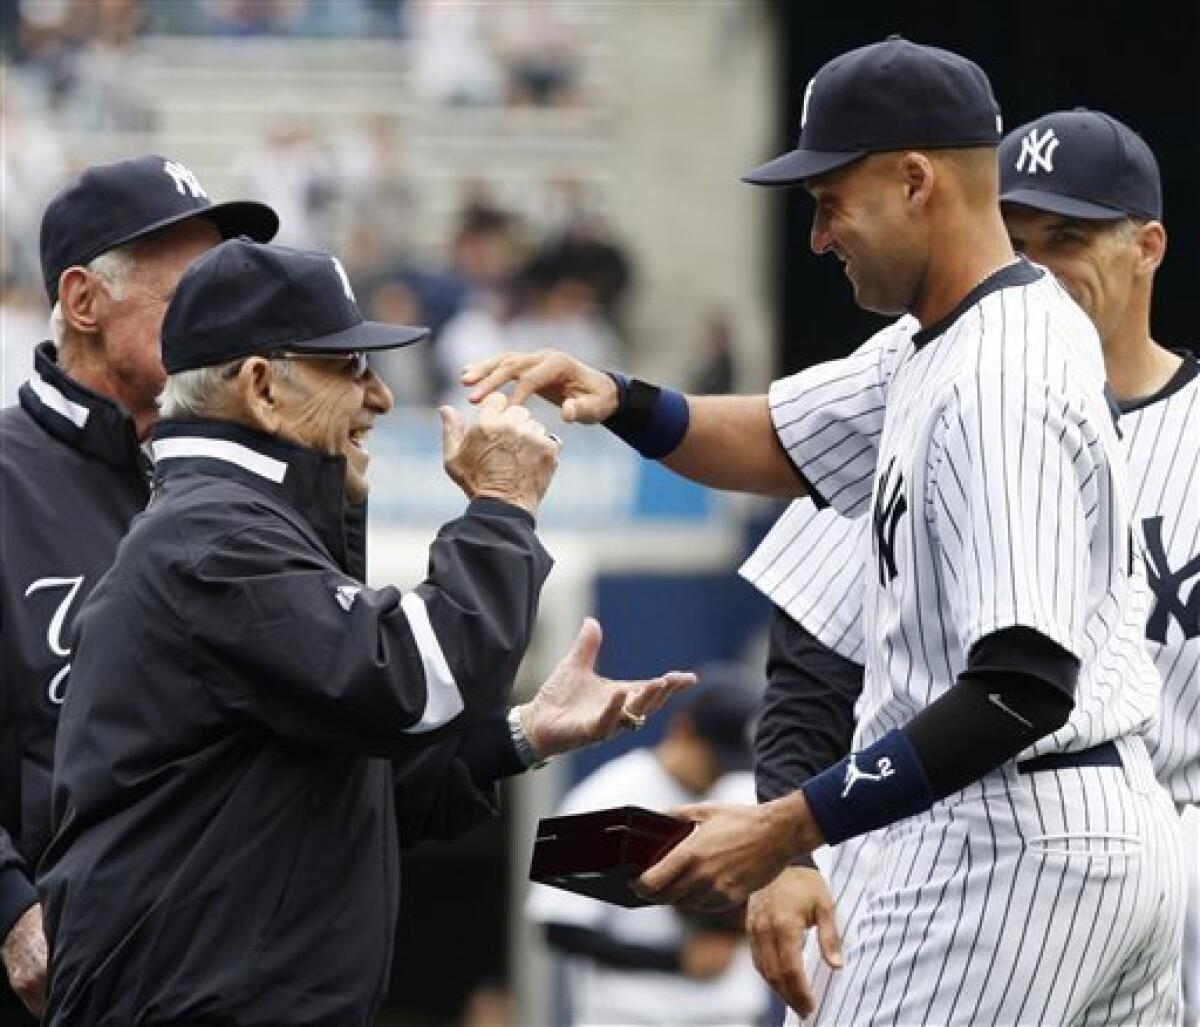 Former Yankees who wore No. 2 share memories of number and Derek